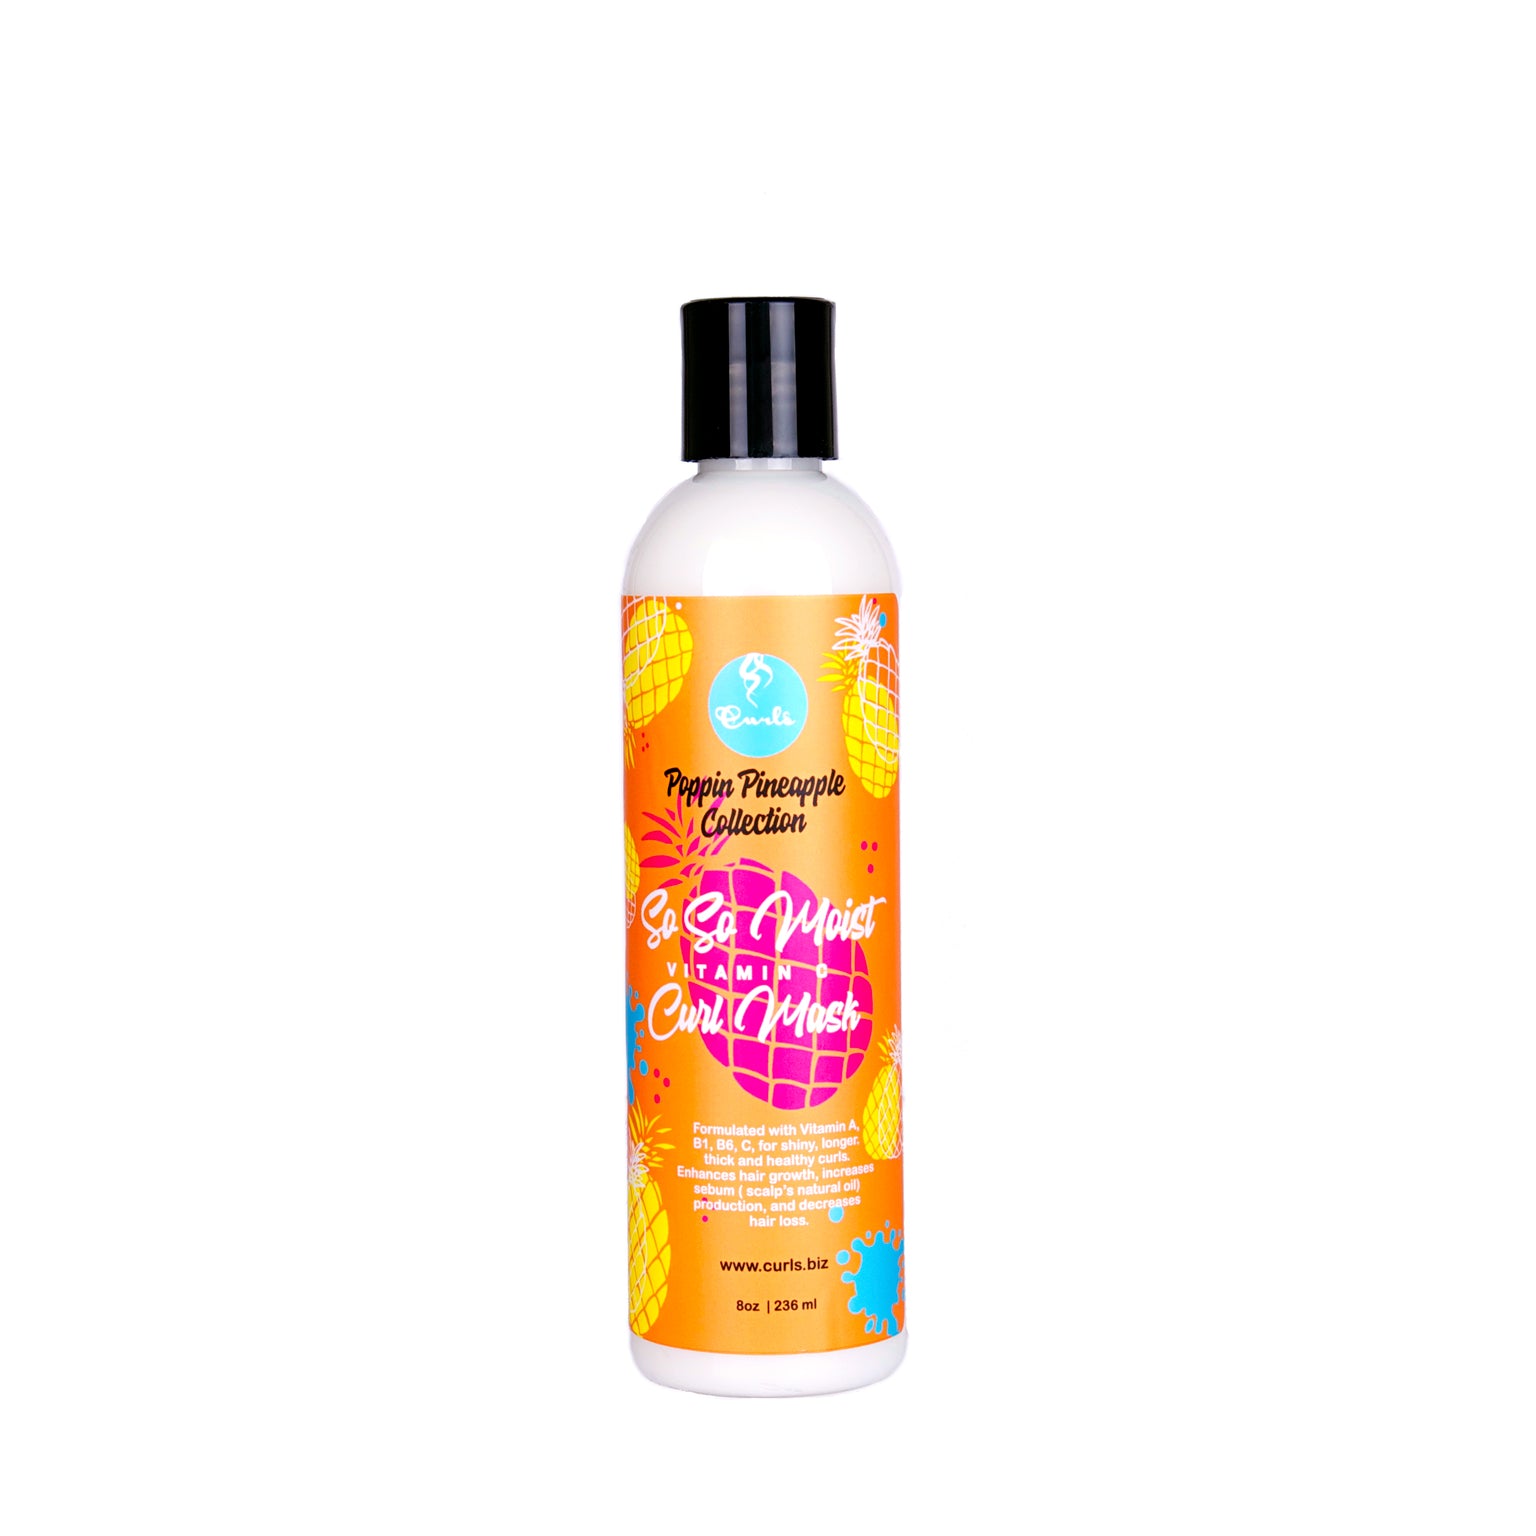 Curls - Poppin Pineapple Collection So So Moist Vitamin C Curl Mask 8oz